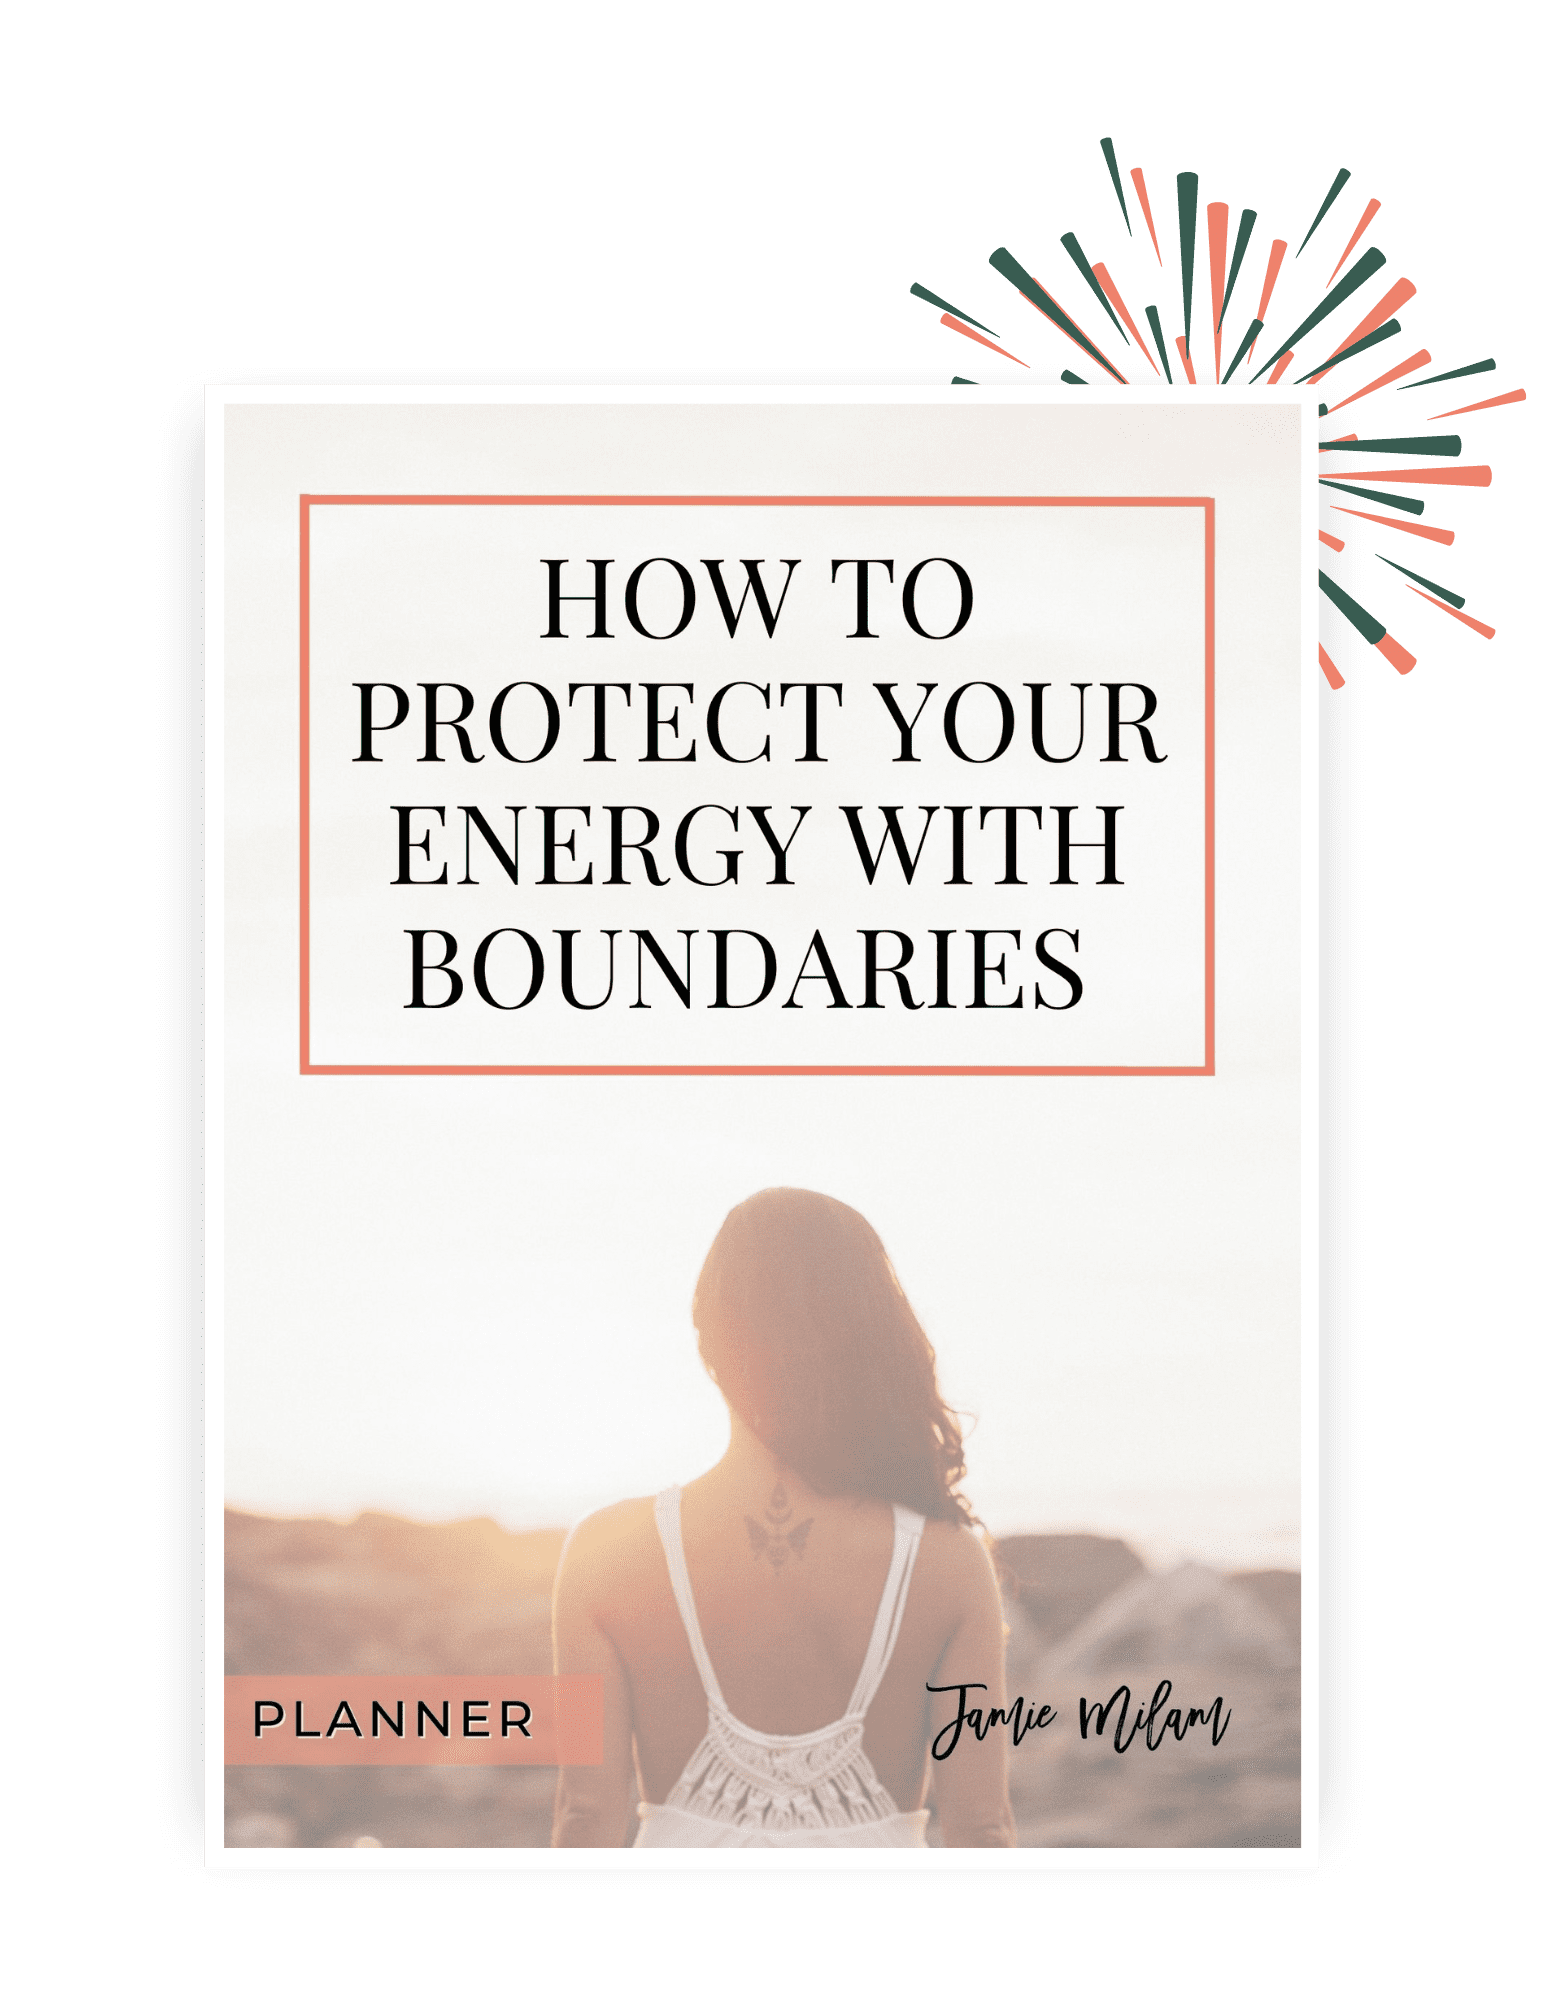 How to Protect Your Energy with Boundaries